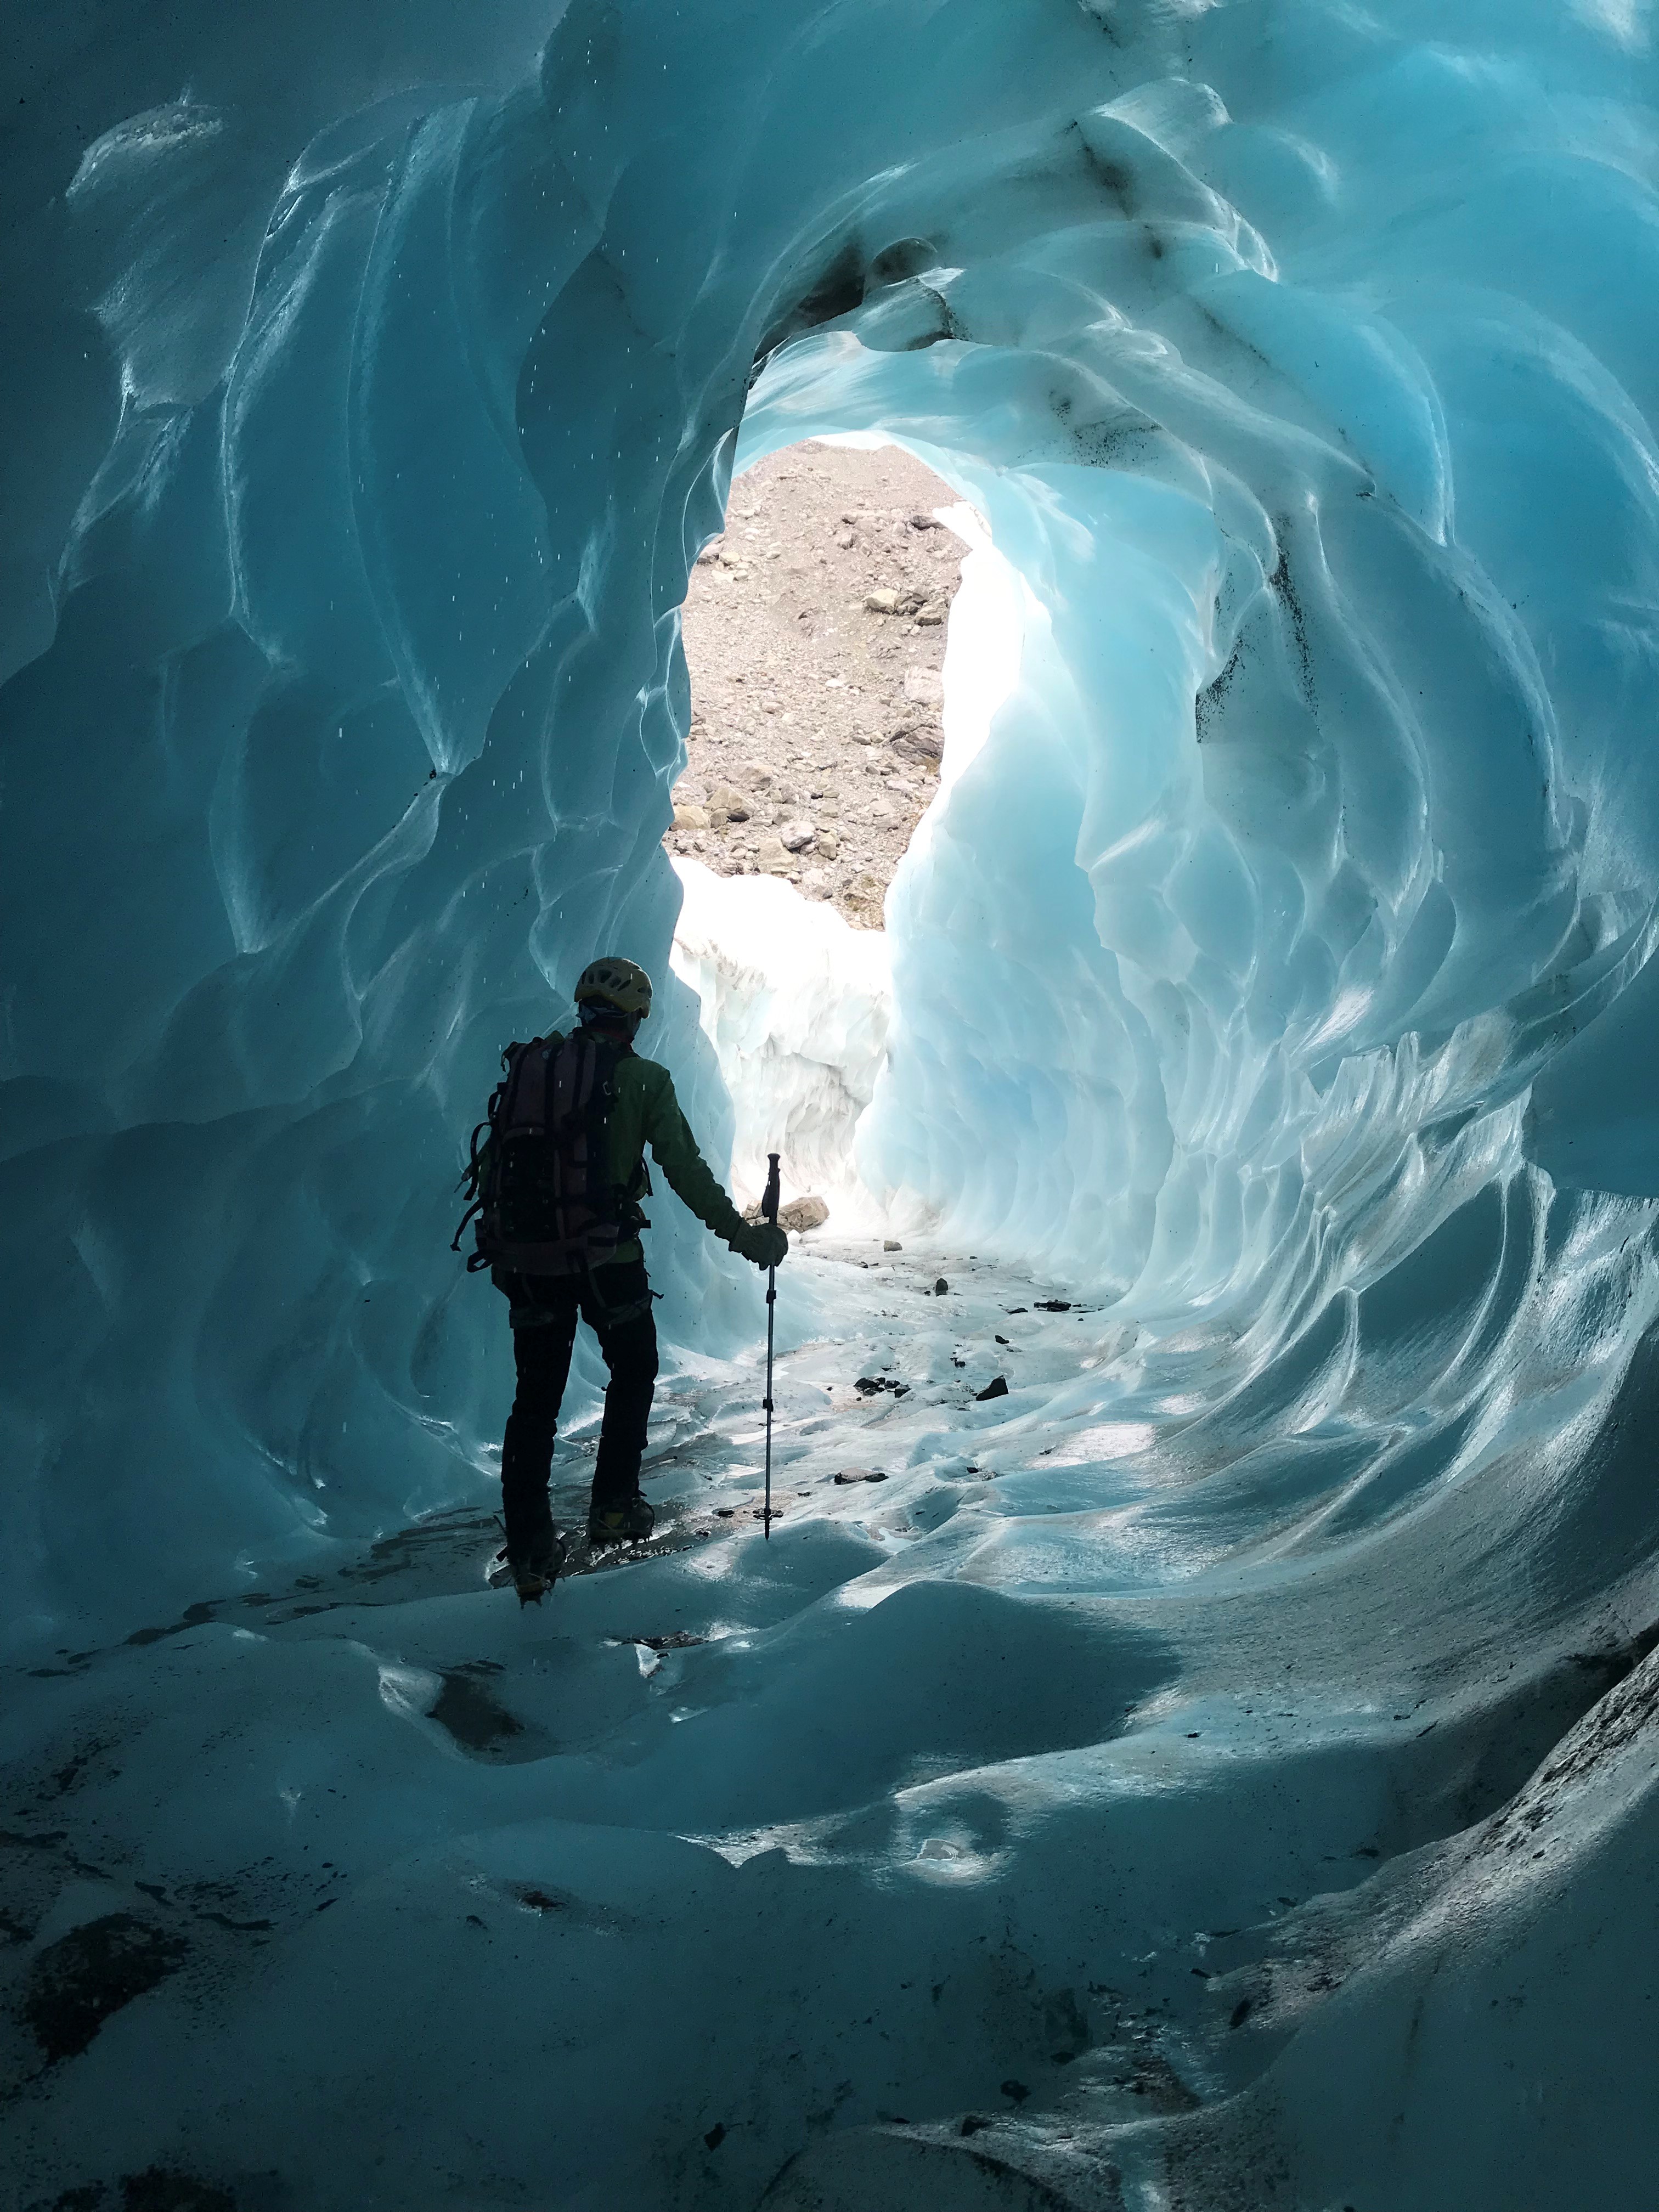 A fantastic ice tunnel currently on the Fox Glacier.